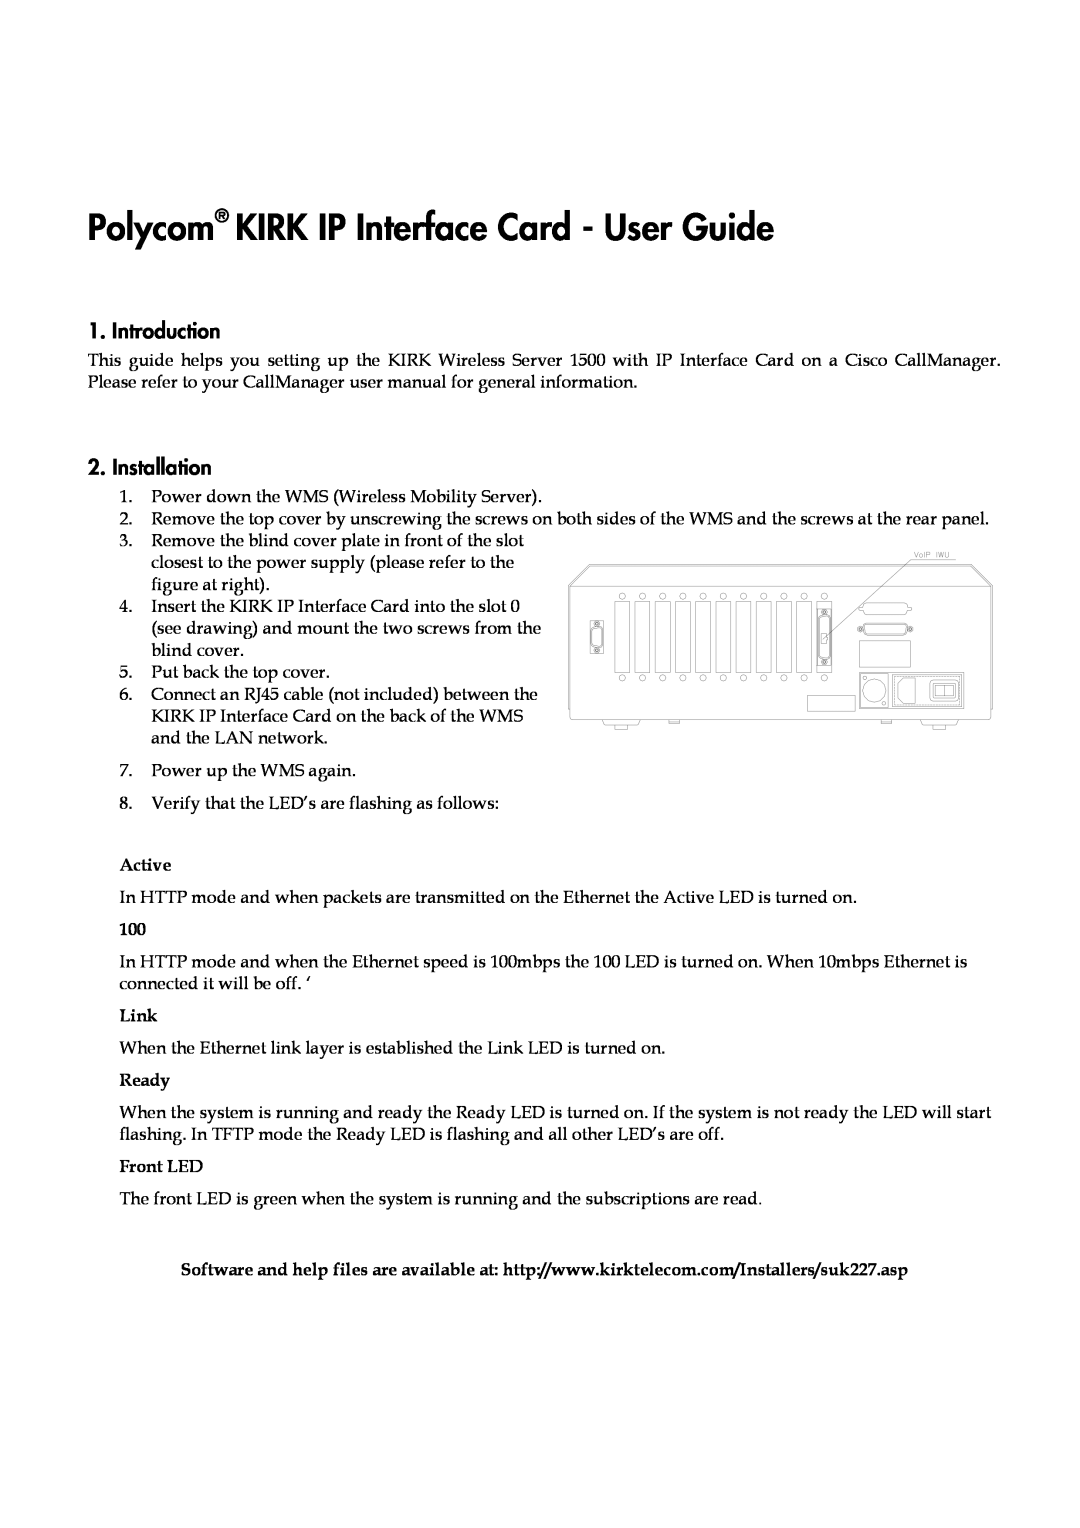 Polycom KIRK IP user manual Introduction, Installation, Active, Link, Ready, Front LED 